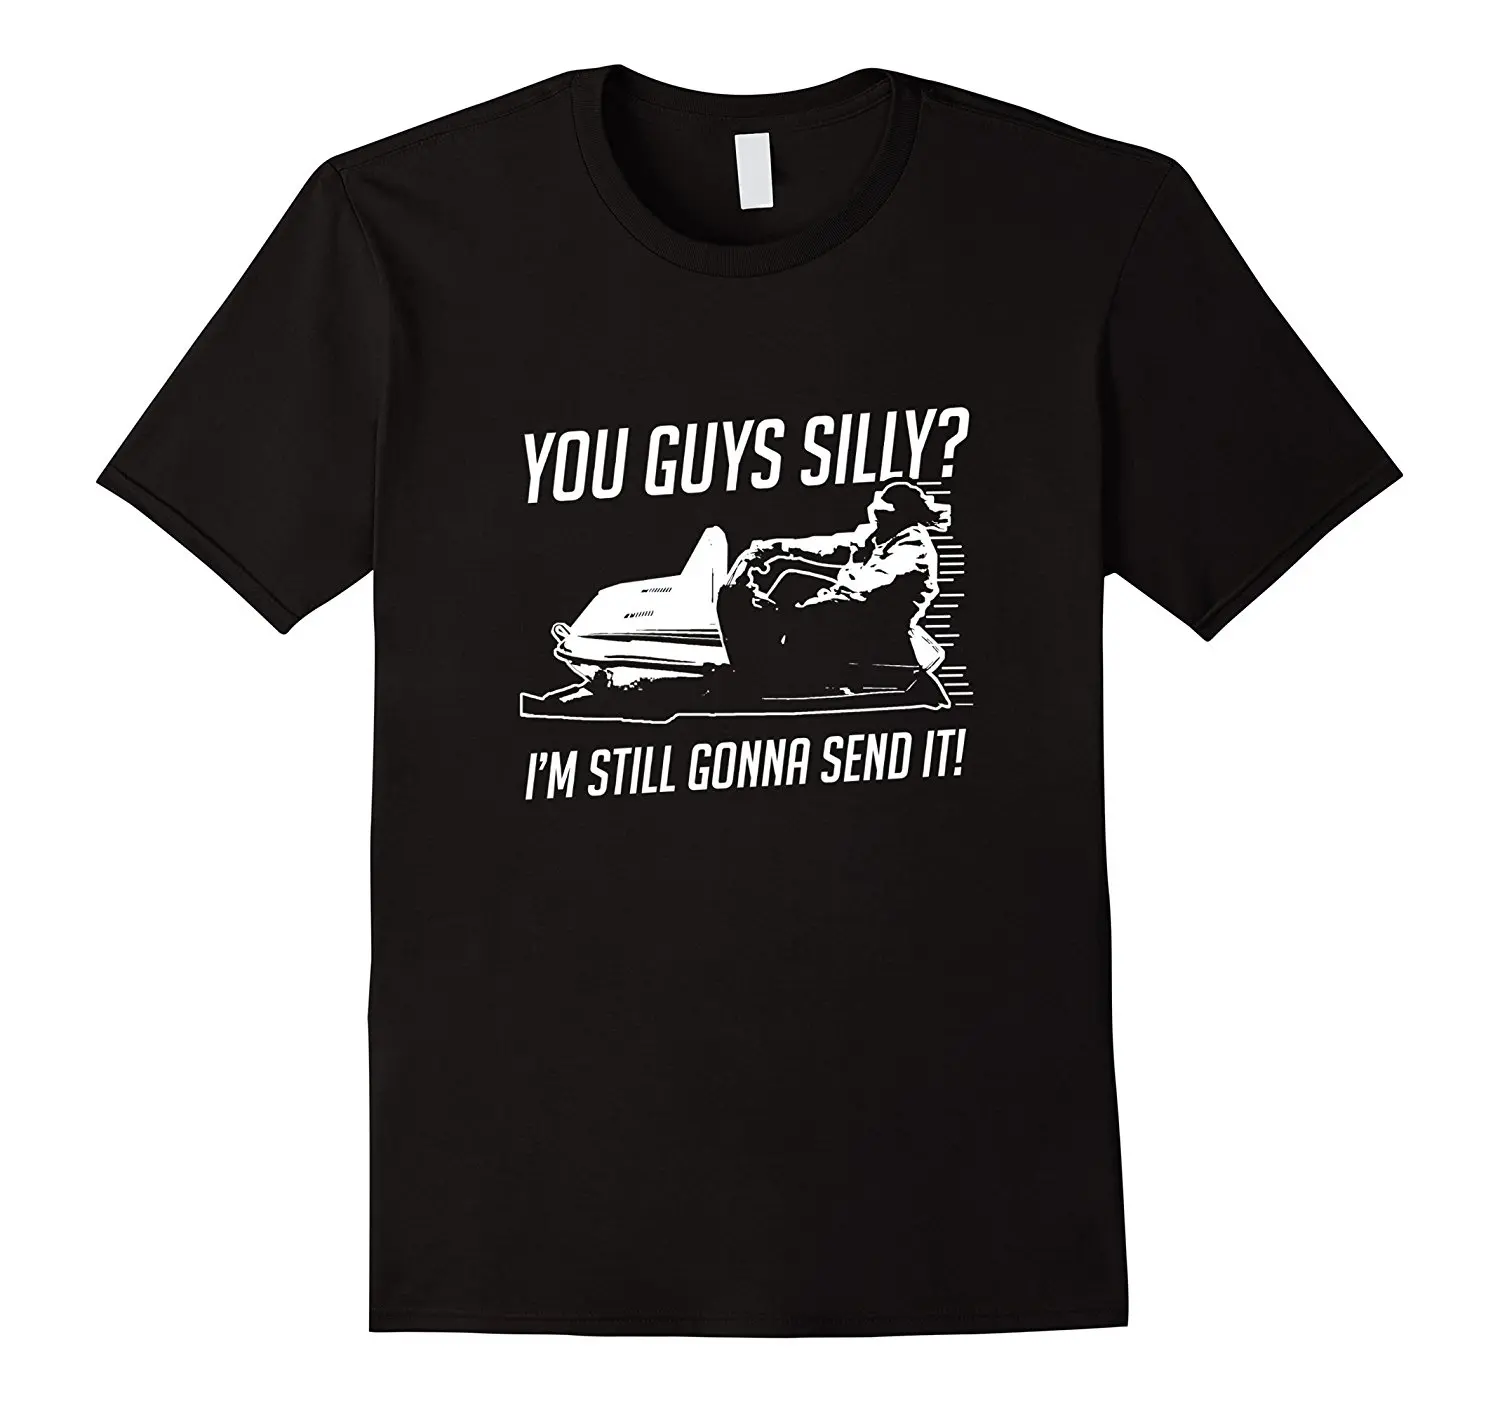 

Funny Cool You Guys Silly I'm Still Gonna Send It! T-shirts Good Quality Brand Cotton Shirt Summer Style Cool Shirts Fresh